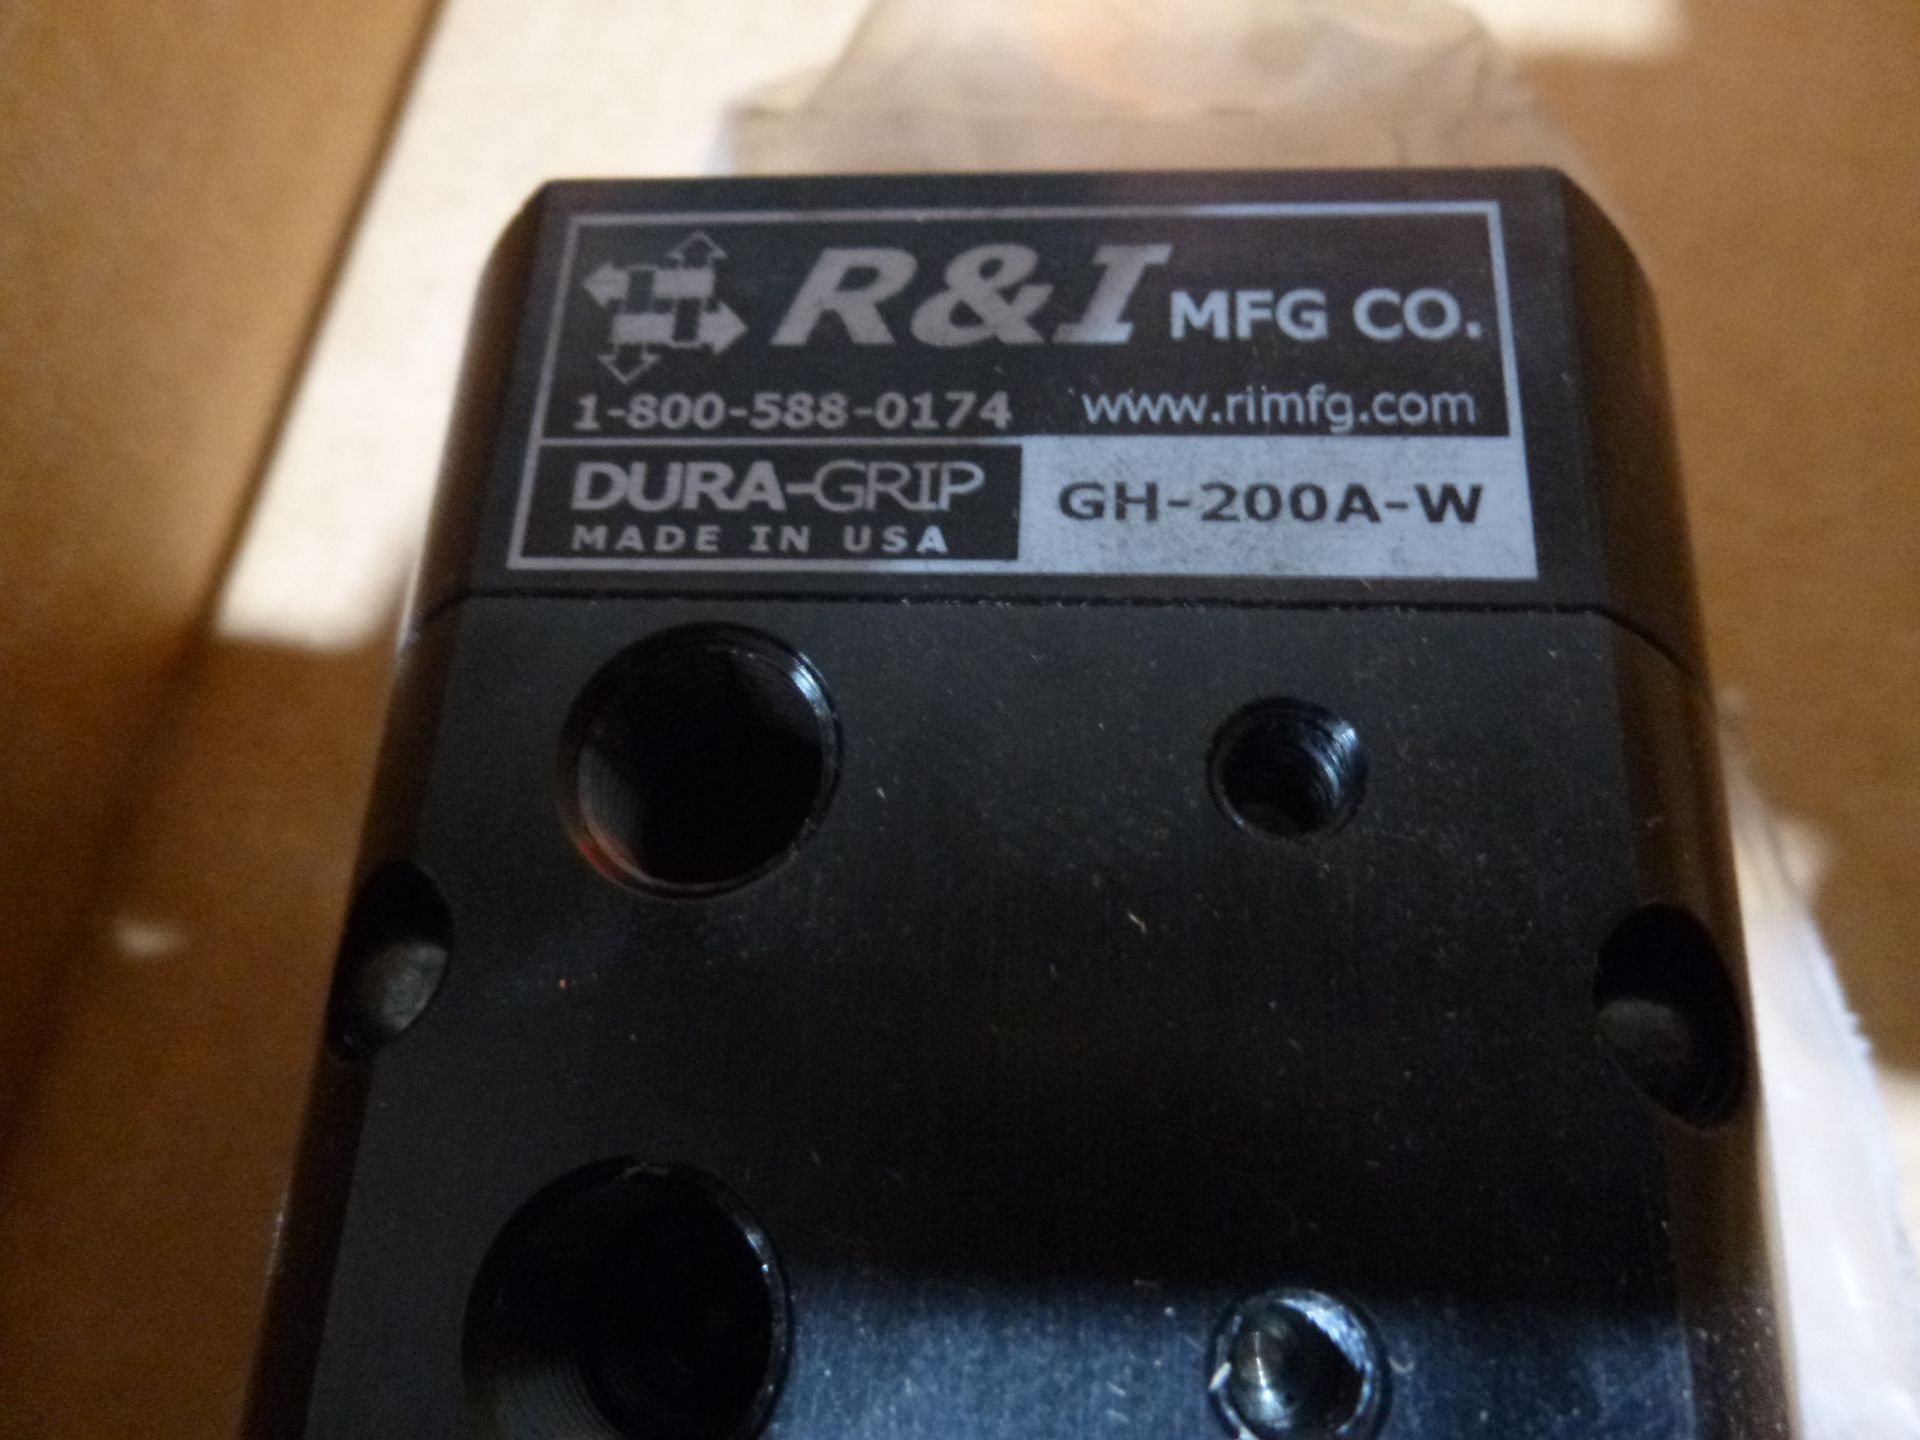 R&I mfg co, dura-grip Model GH-200a-w, new as pictured, as always with Brolyn LLC auctions, all lots - Image 2 of 2